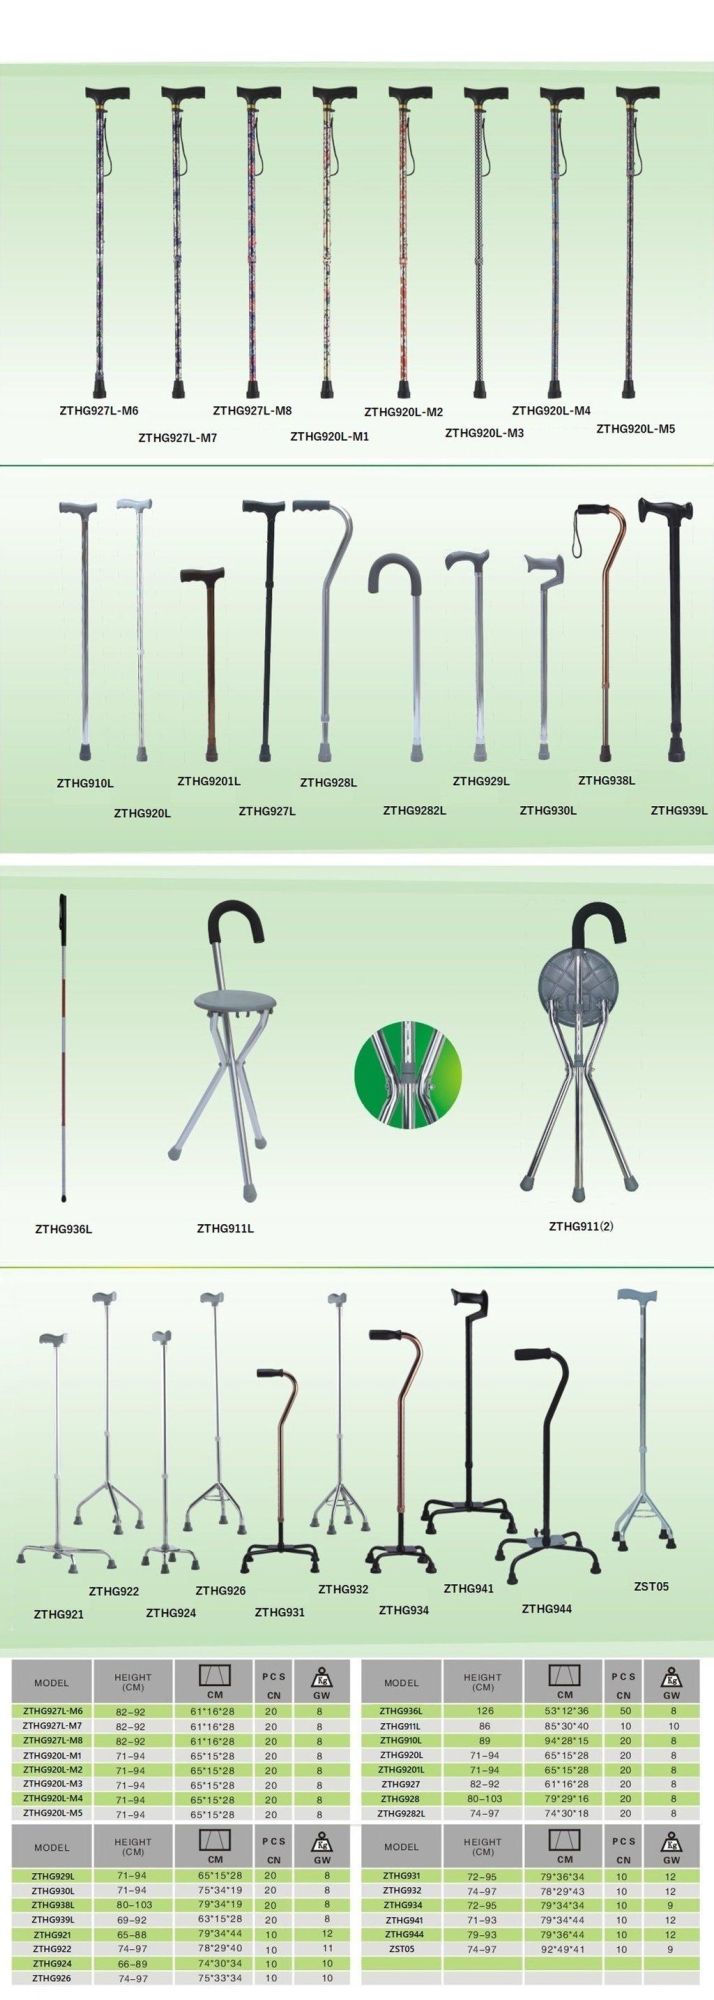 Disabled People Orthopedic Crutch Steel Lightweight Strong Safety Stable Adjustable Height Walking Aids Foldable Rehabilitation Product